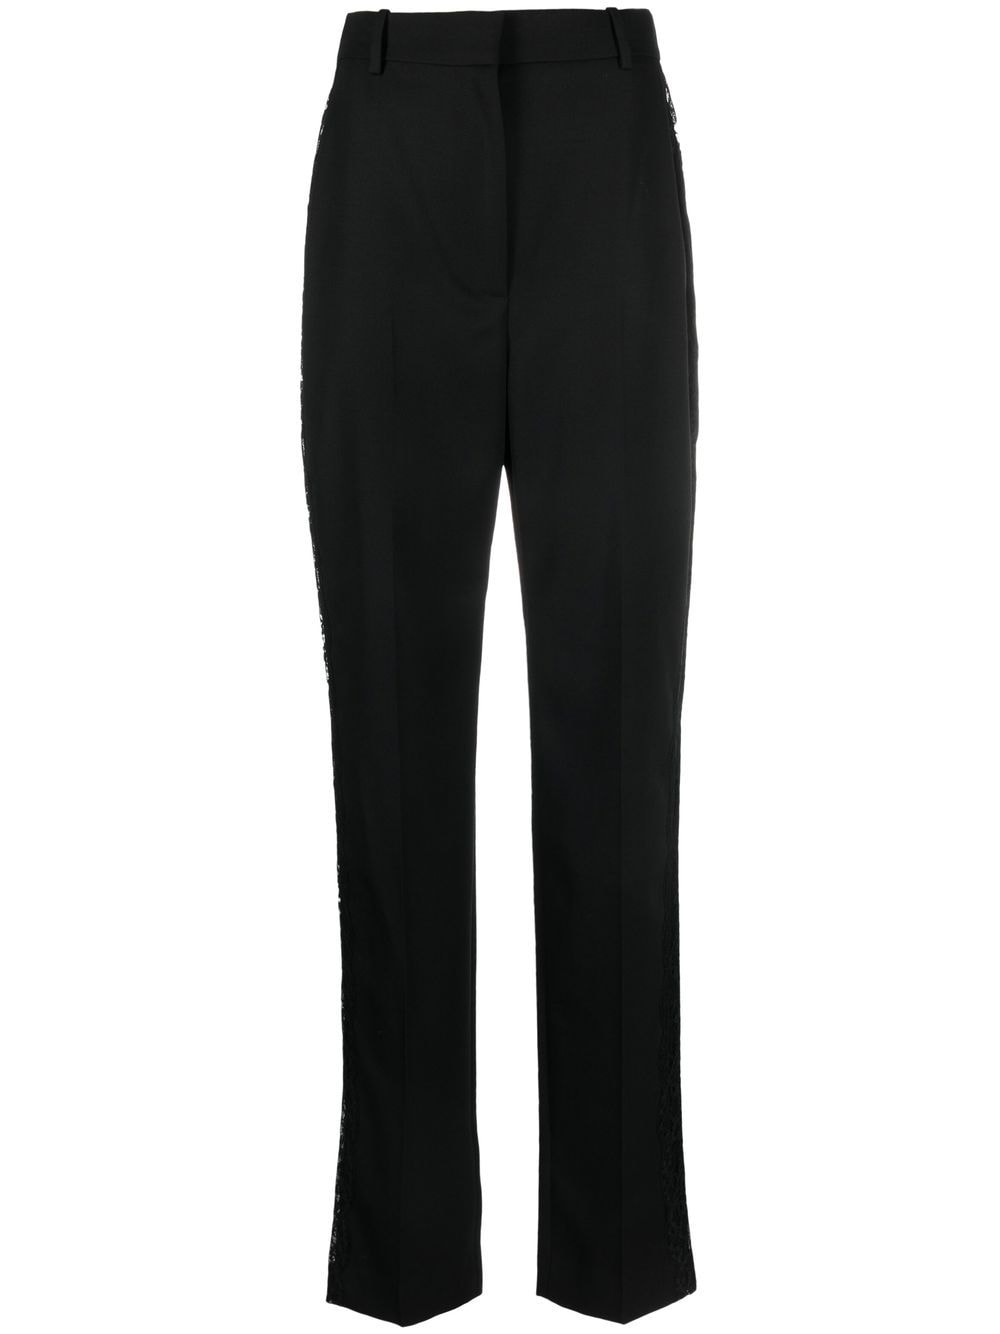 lace-panel tailored-cut trousers